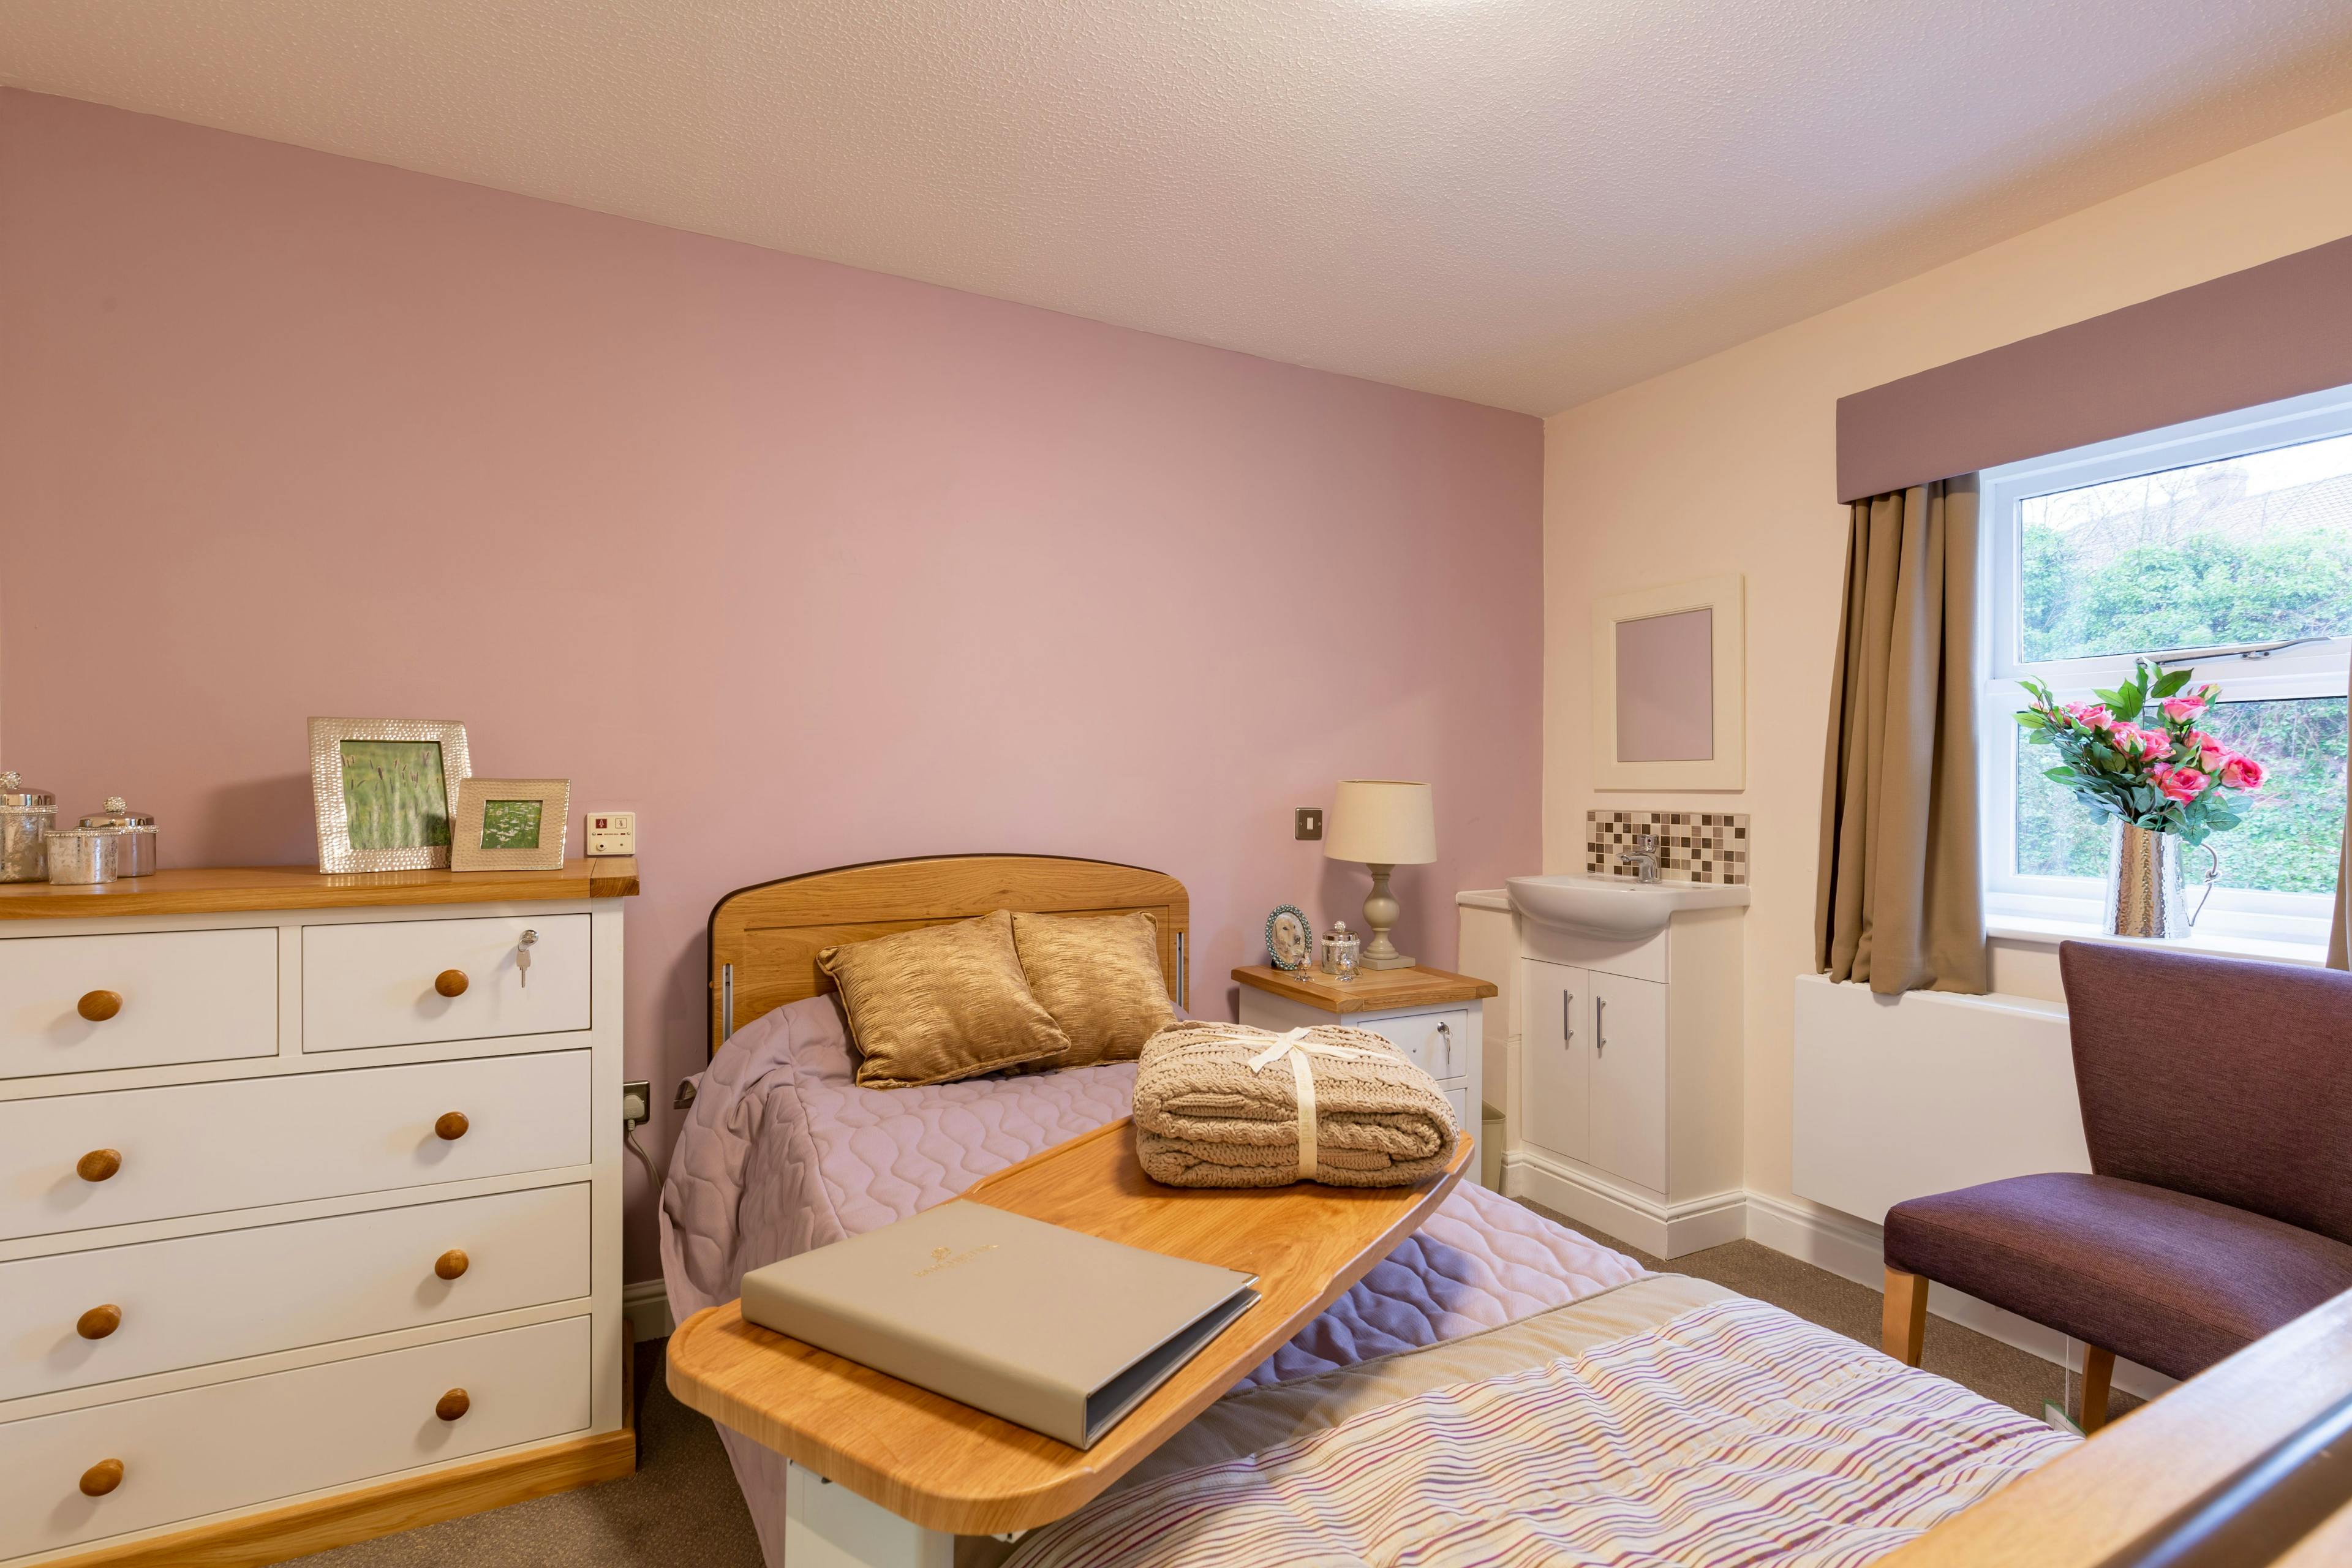 Bedroom at South Chowdene Care Home in Gateshead, Tyne and Wear